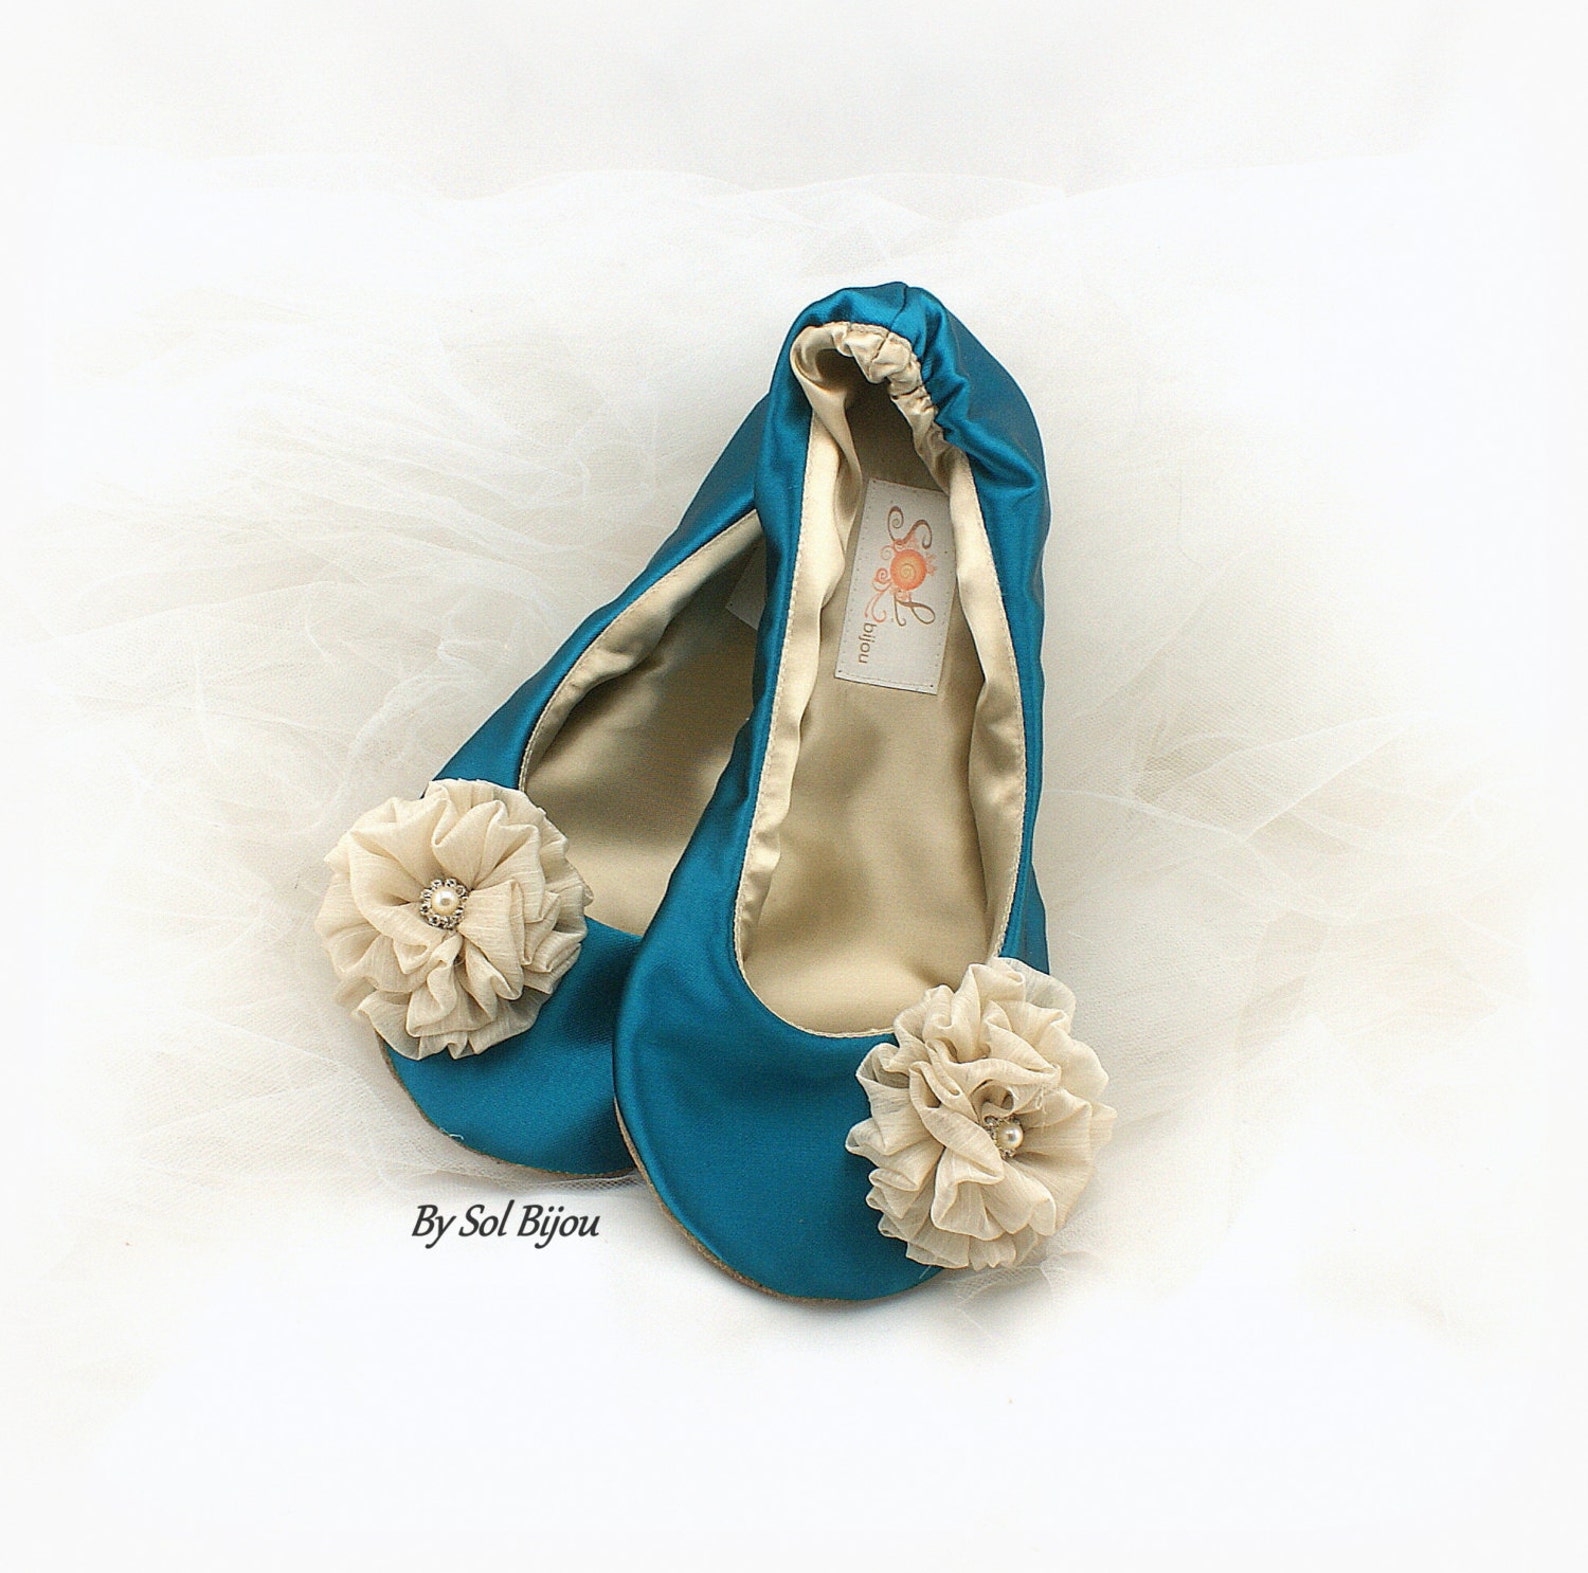 teal and gold wedding ballet flats, teal ballet shoes, turquoise wedding flats shoes, teal satin bridal flats